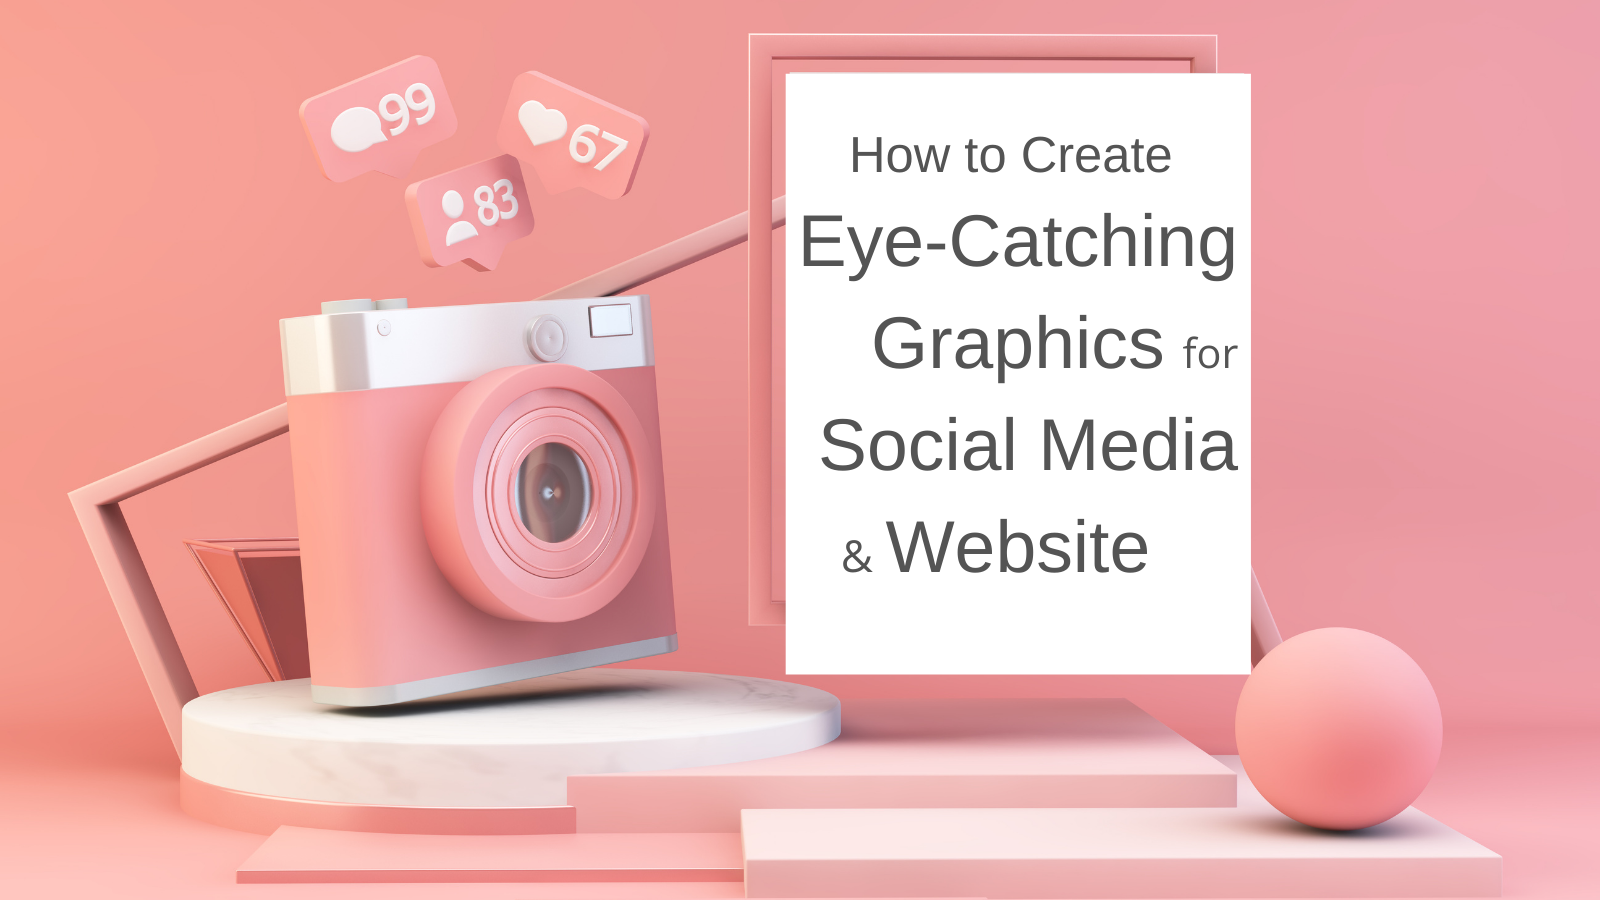 How to Create Eye-Catching Graphics for Your Social Media and Website